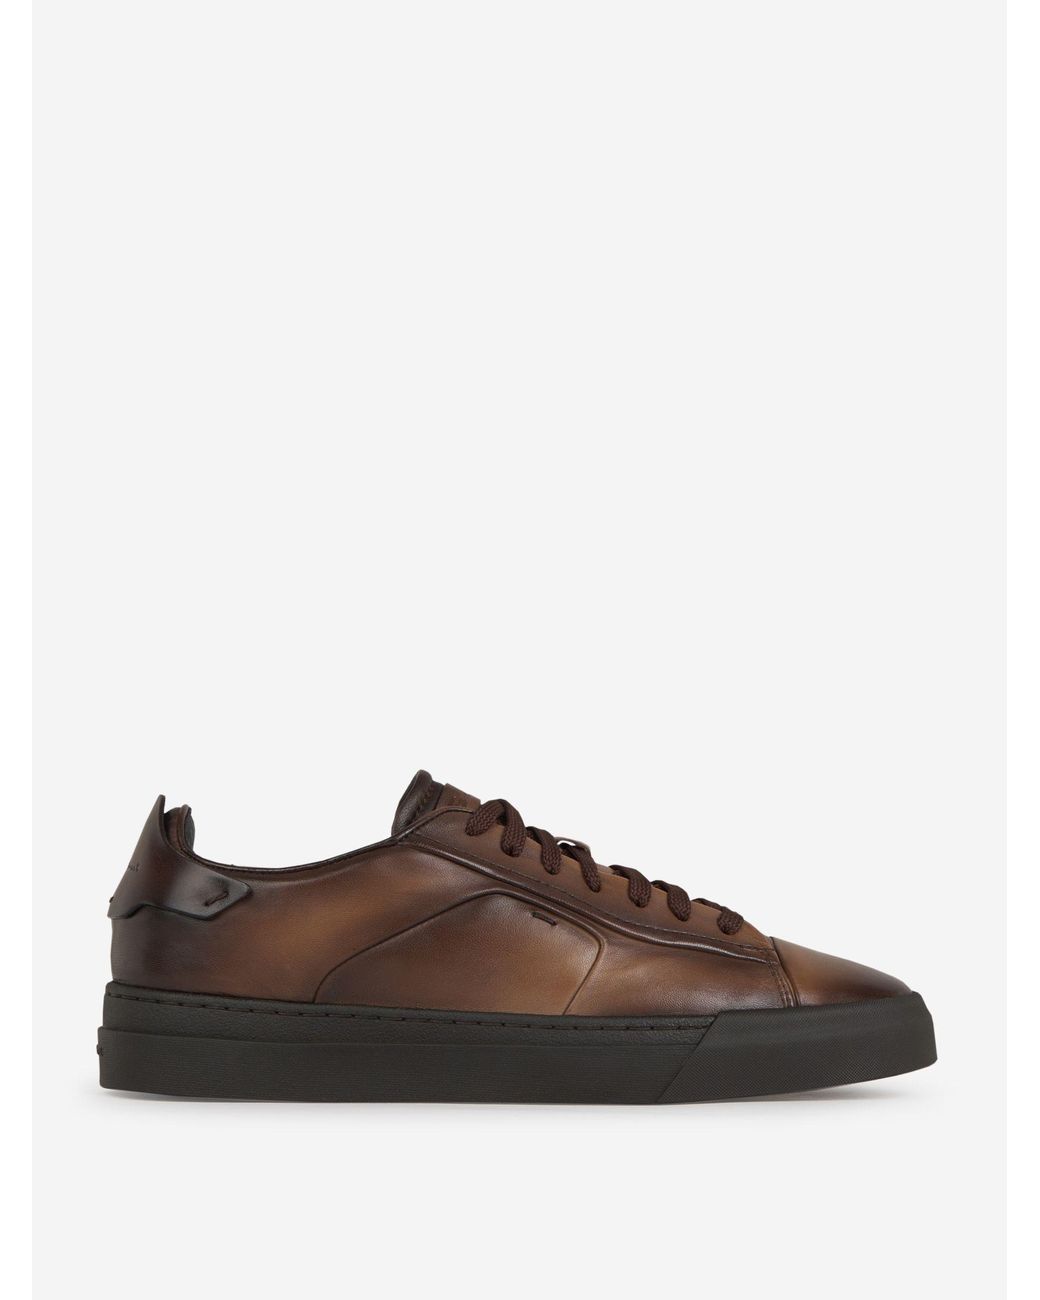 Santoni Polished Leather Sneakers in Brown for Men | Lyst